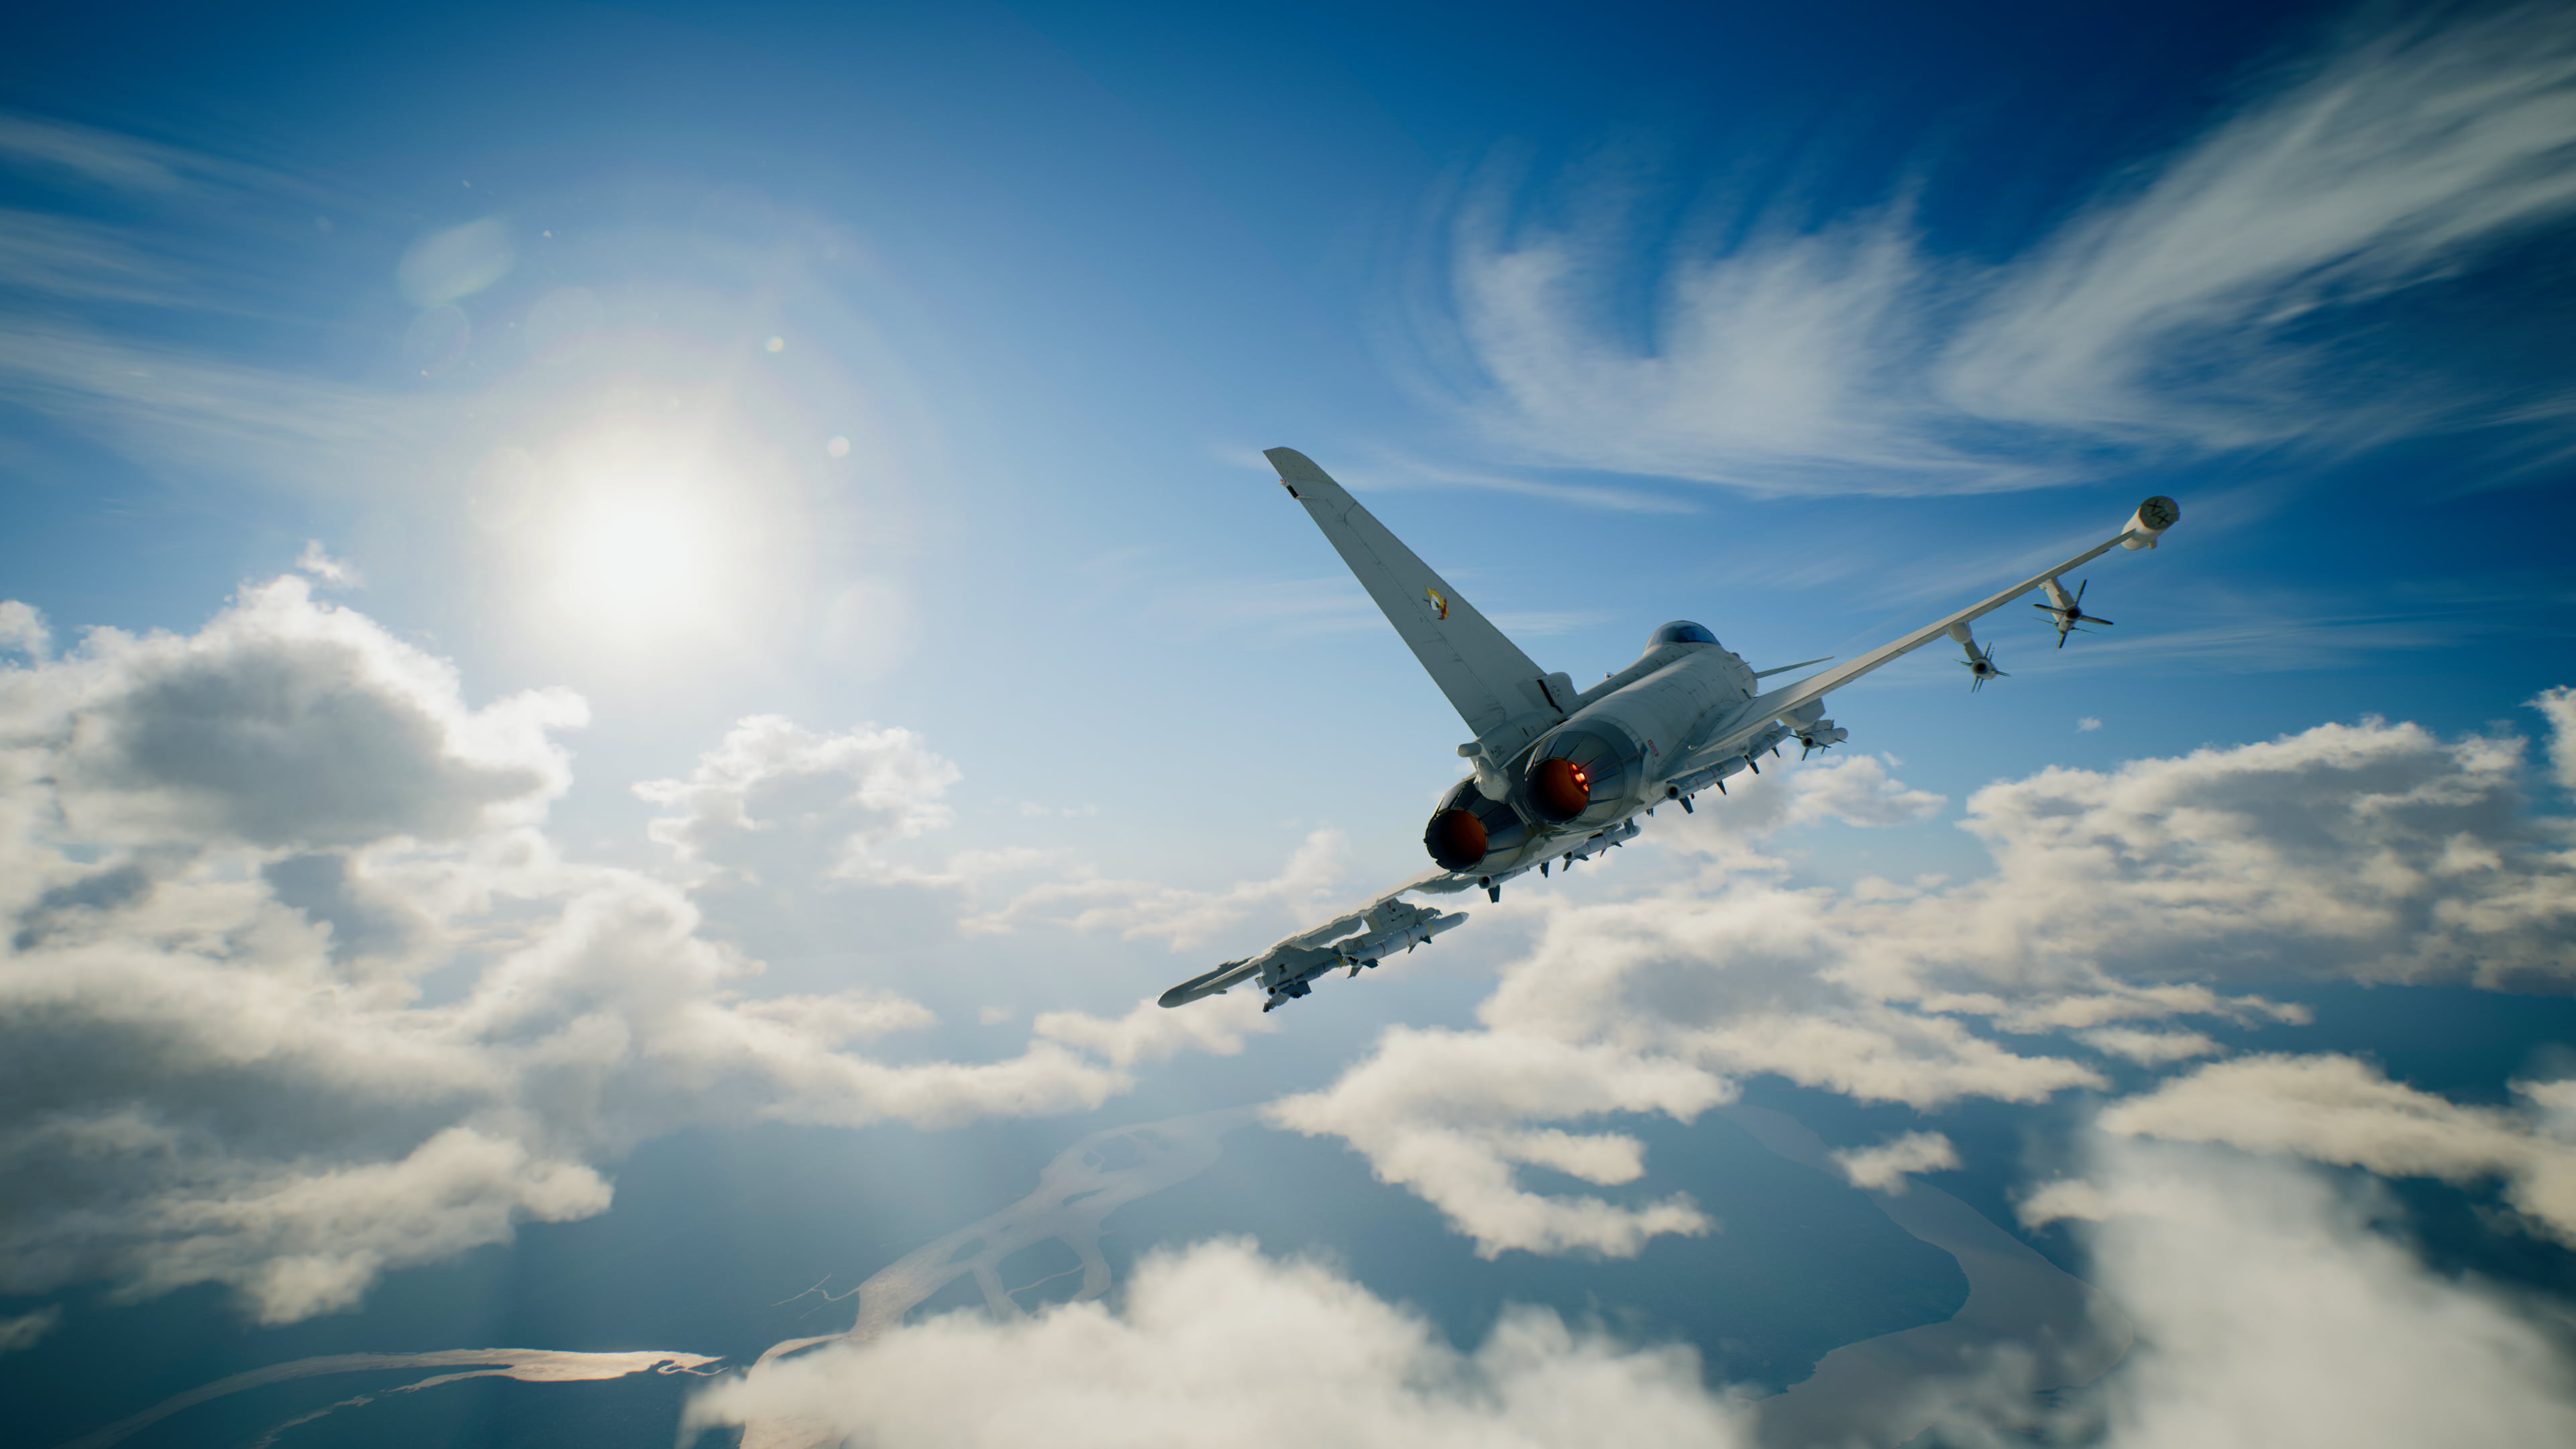 Eurofighter Typhoon, Ace Combat 7, military aircraft